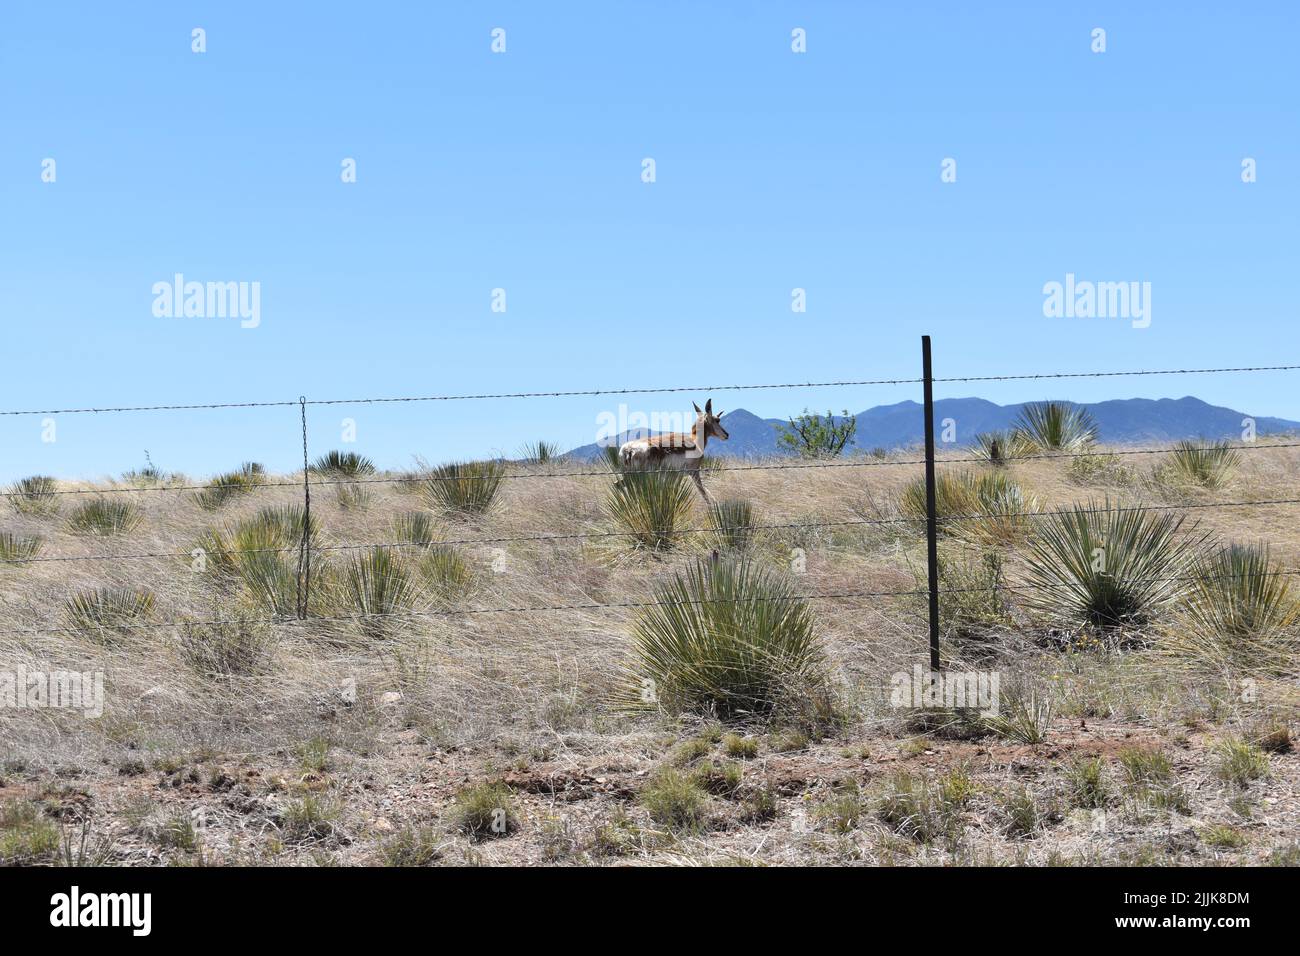 A pronghorn antelope with a barbed-wire fence in the high desert of Arizona, USA Stock Photo